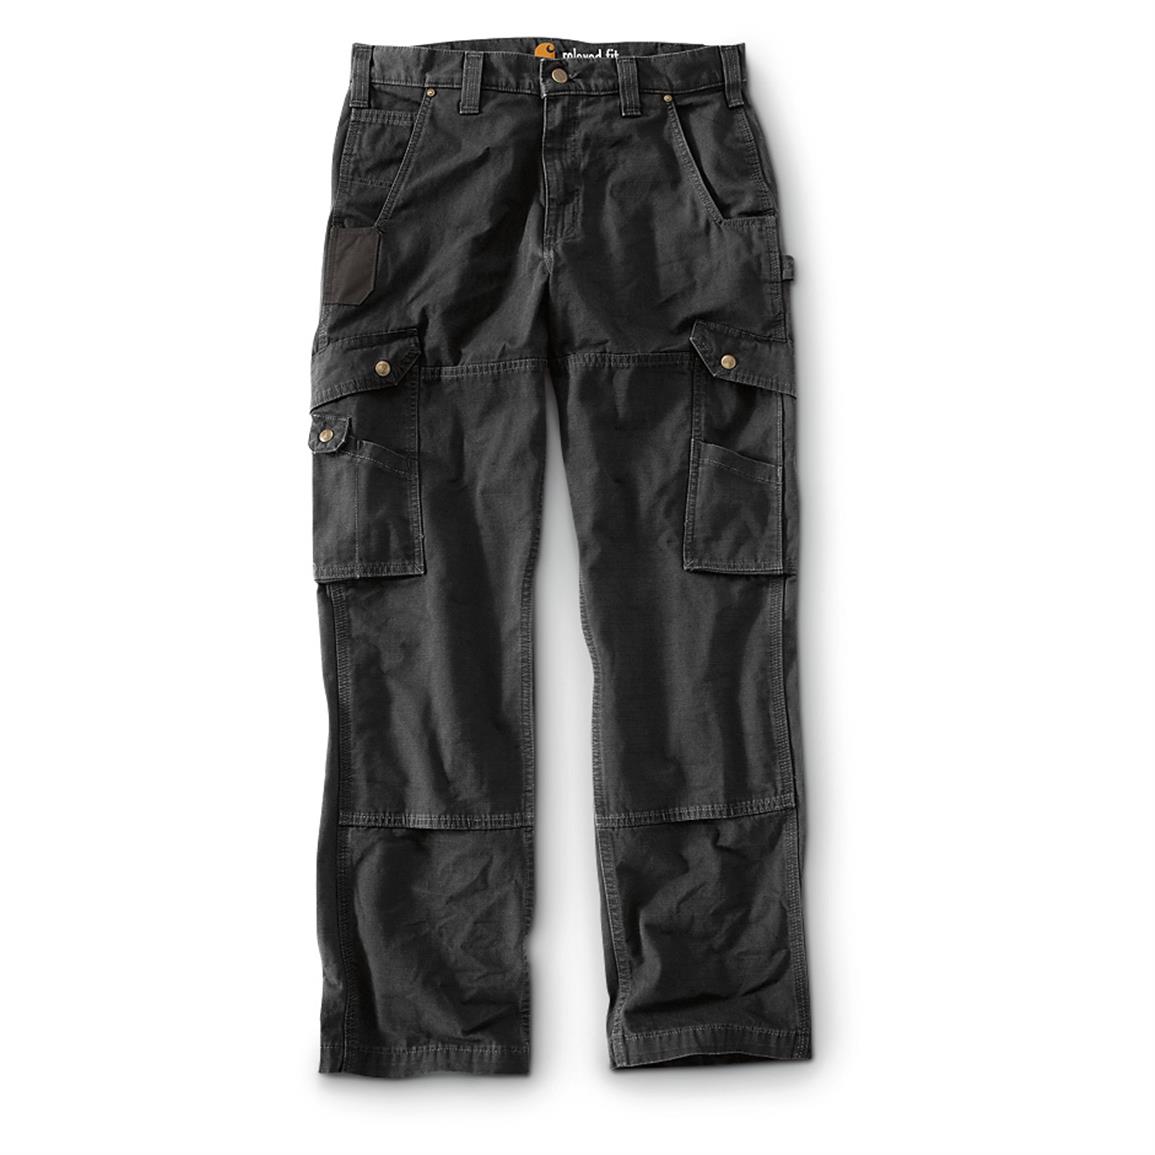 Carhartt Ripstop Cargo Pants - 623529, Jeans & Pants at Sportsman's Guide